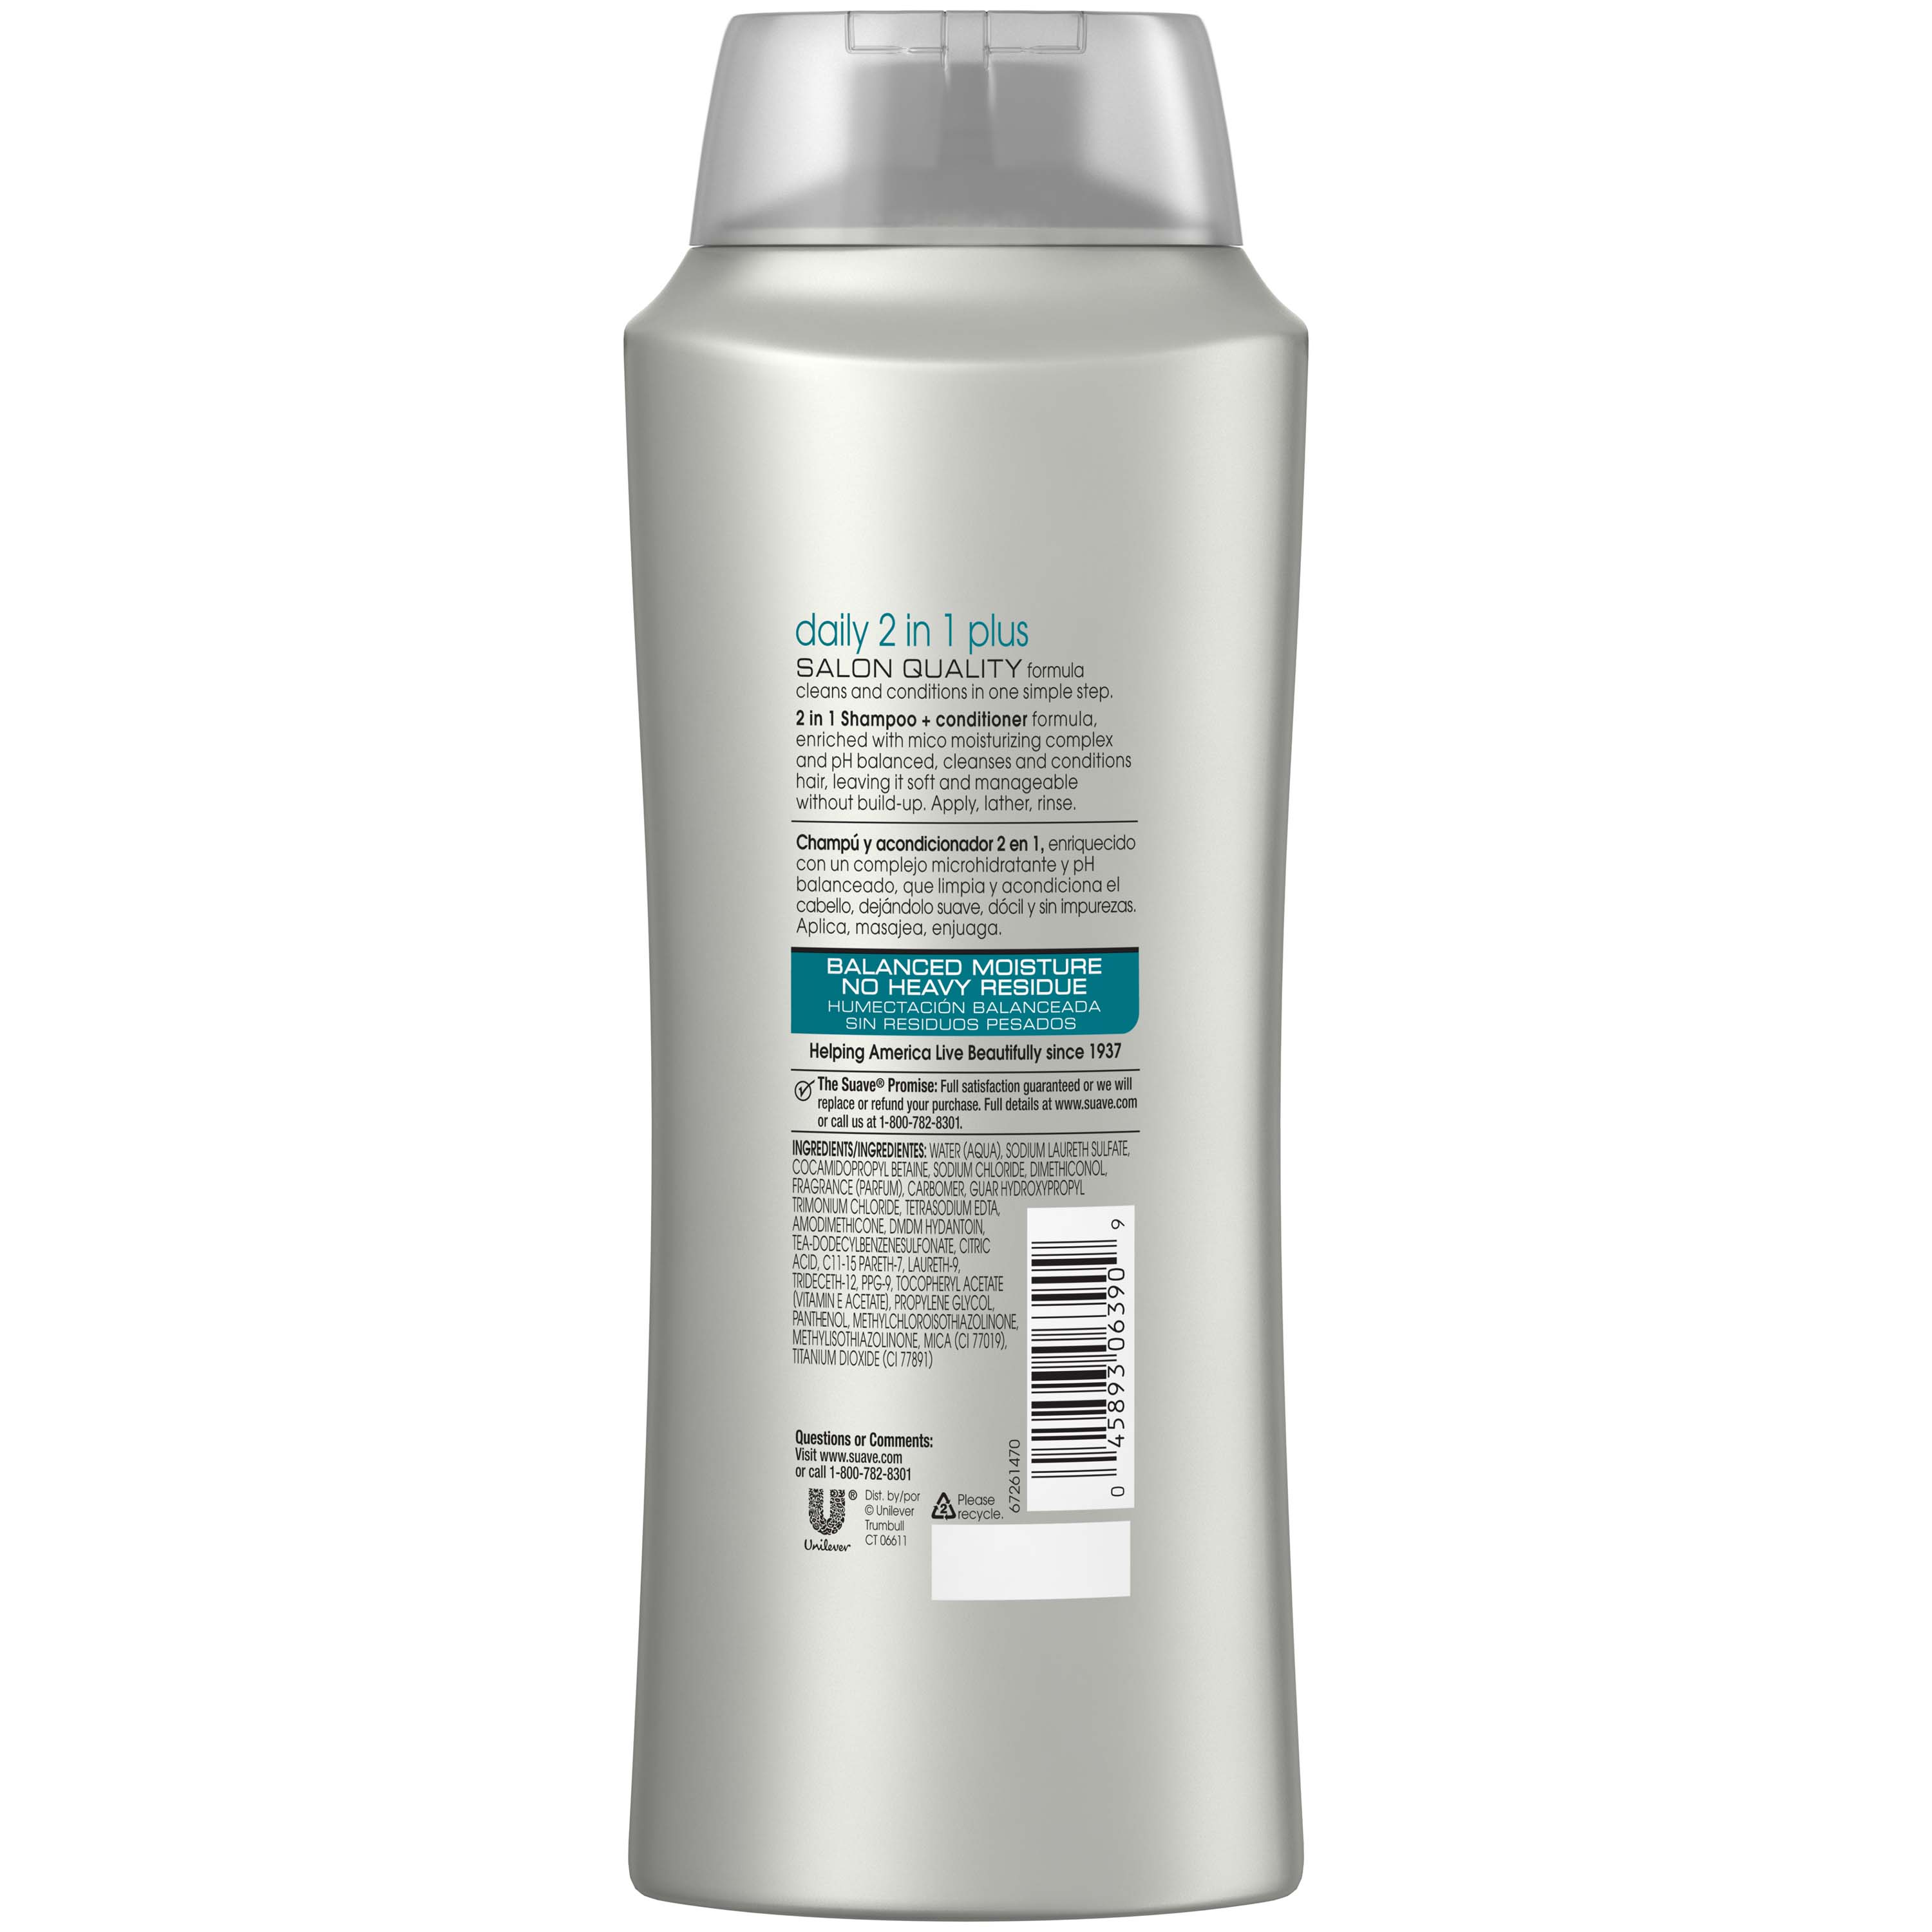 Suave Professionals Clarifying Moisturizing Daily Plus 2 in 1 Shampoo and Conditioner, 28 fl oz - image 4 of 10